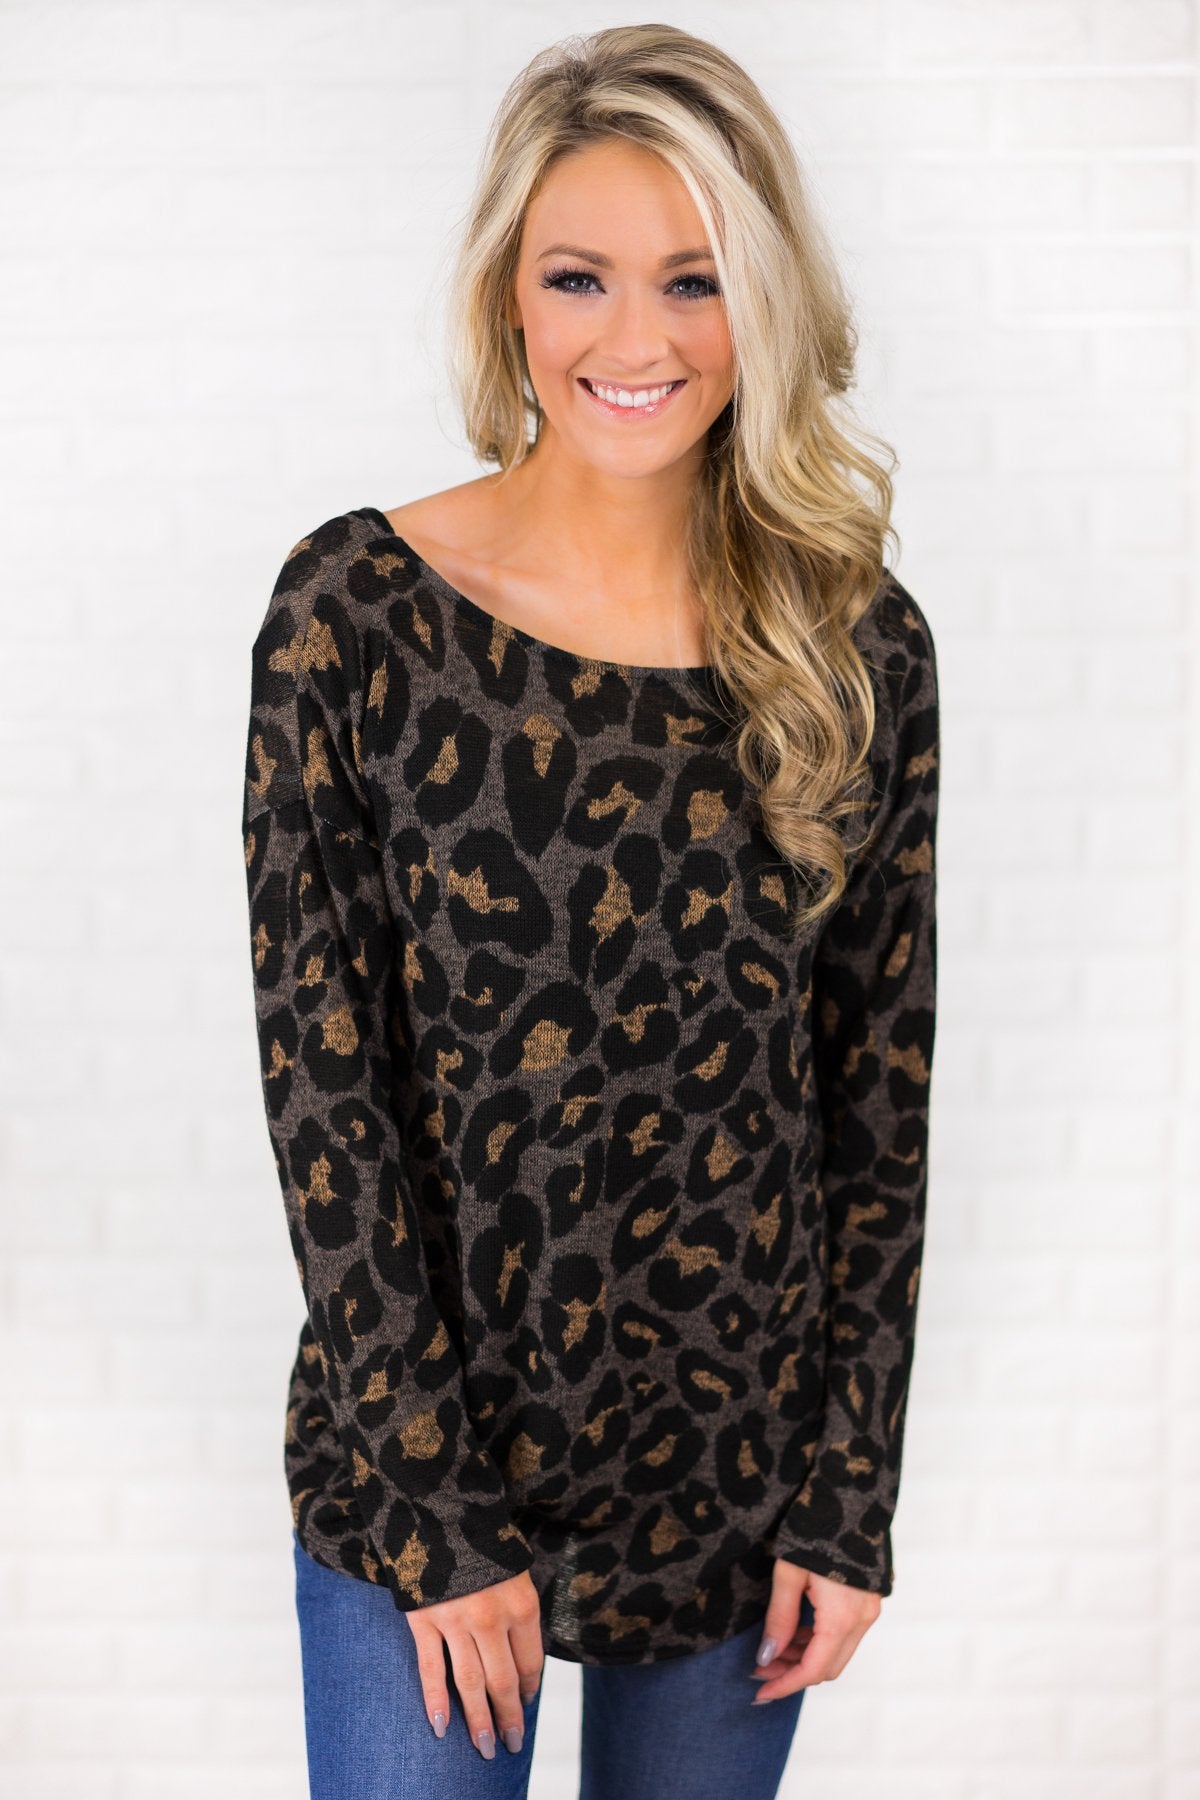 You Don't Cross My Mind Leopard Top